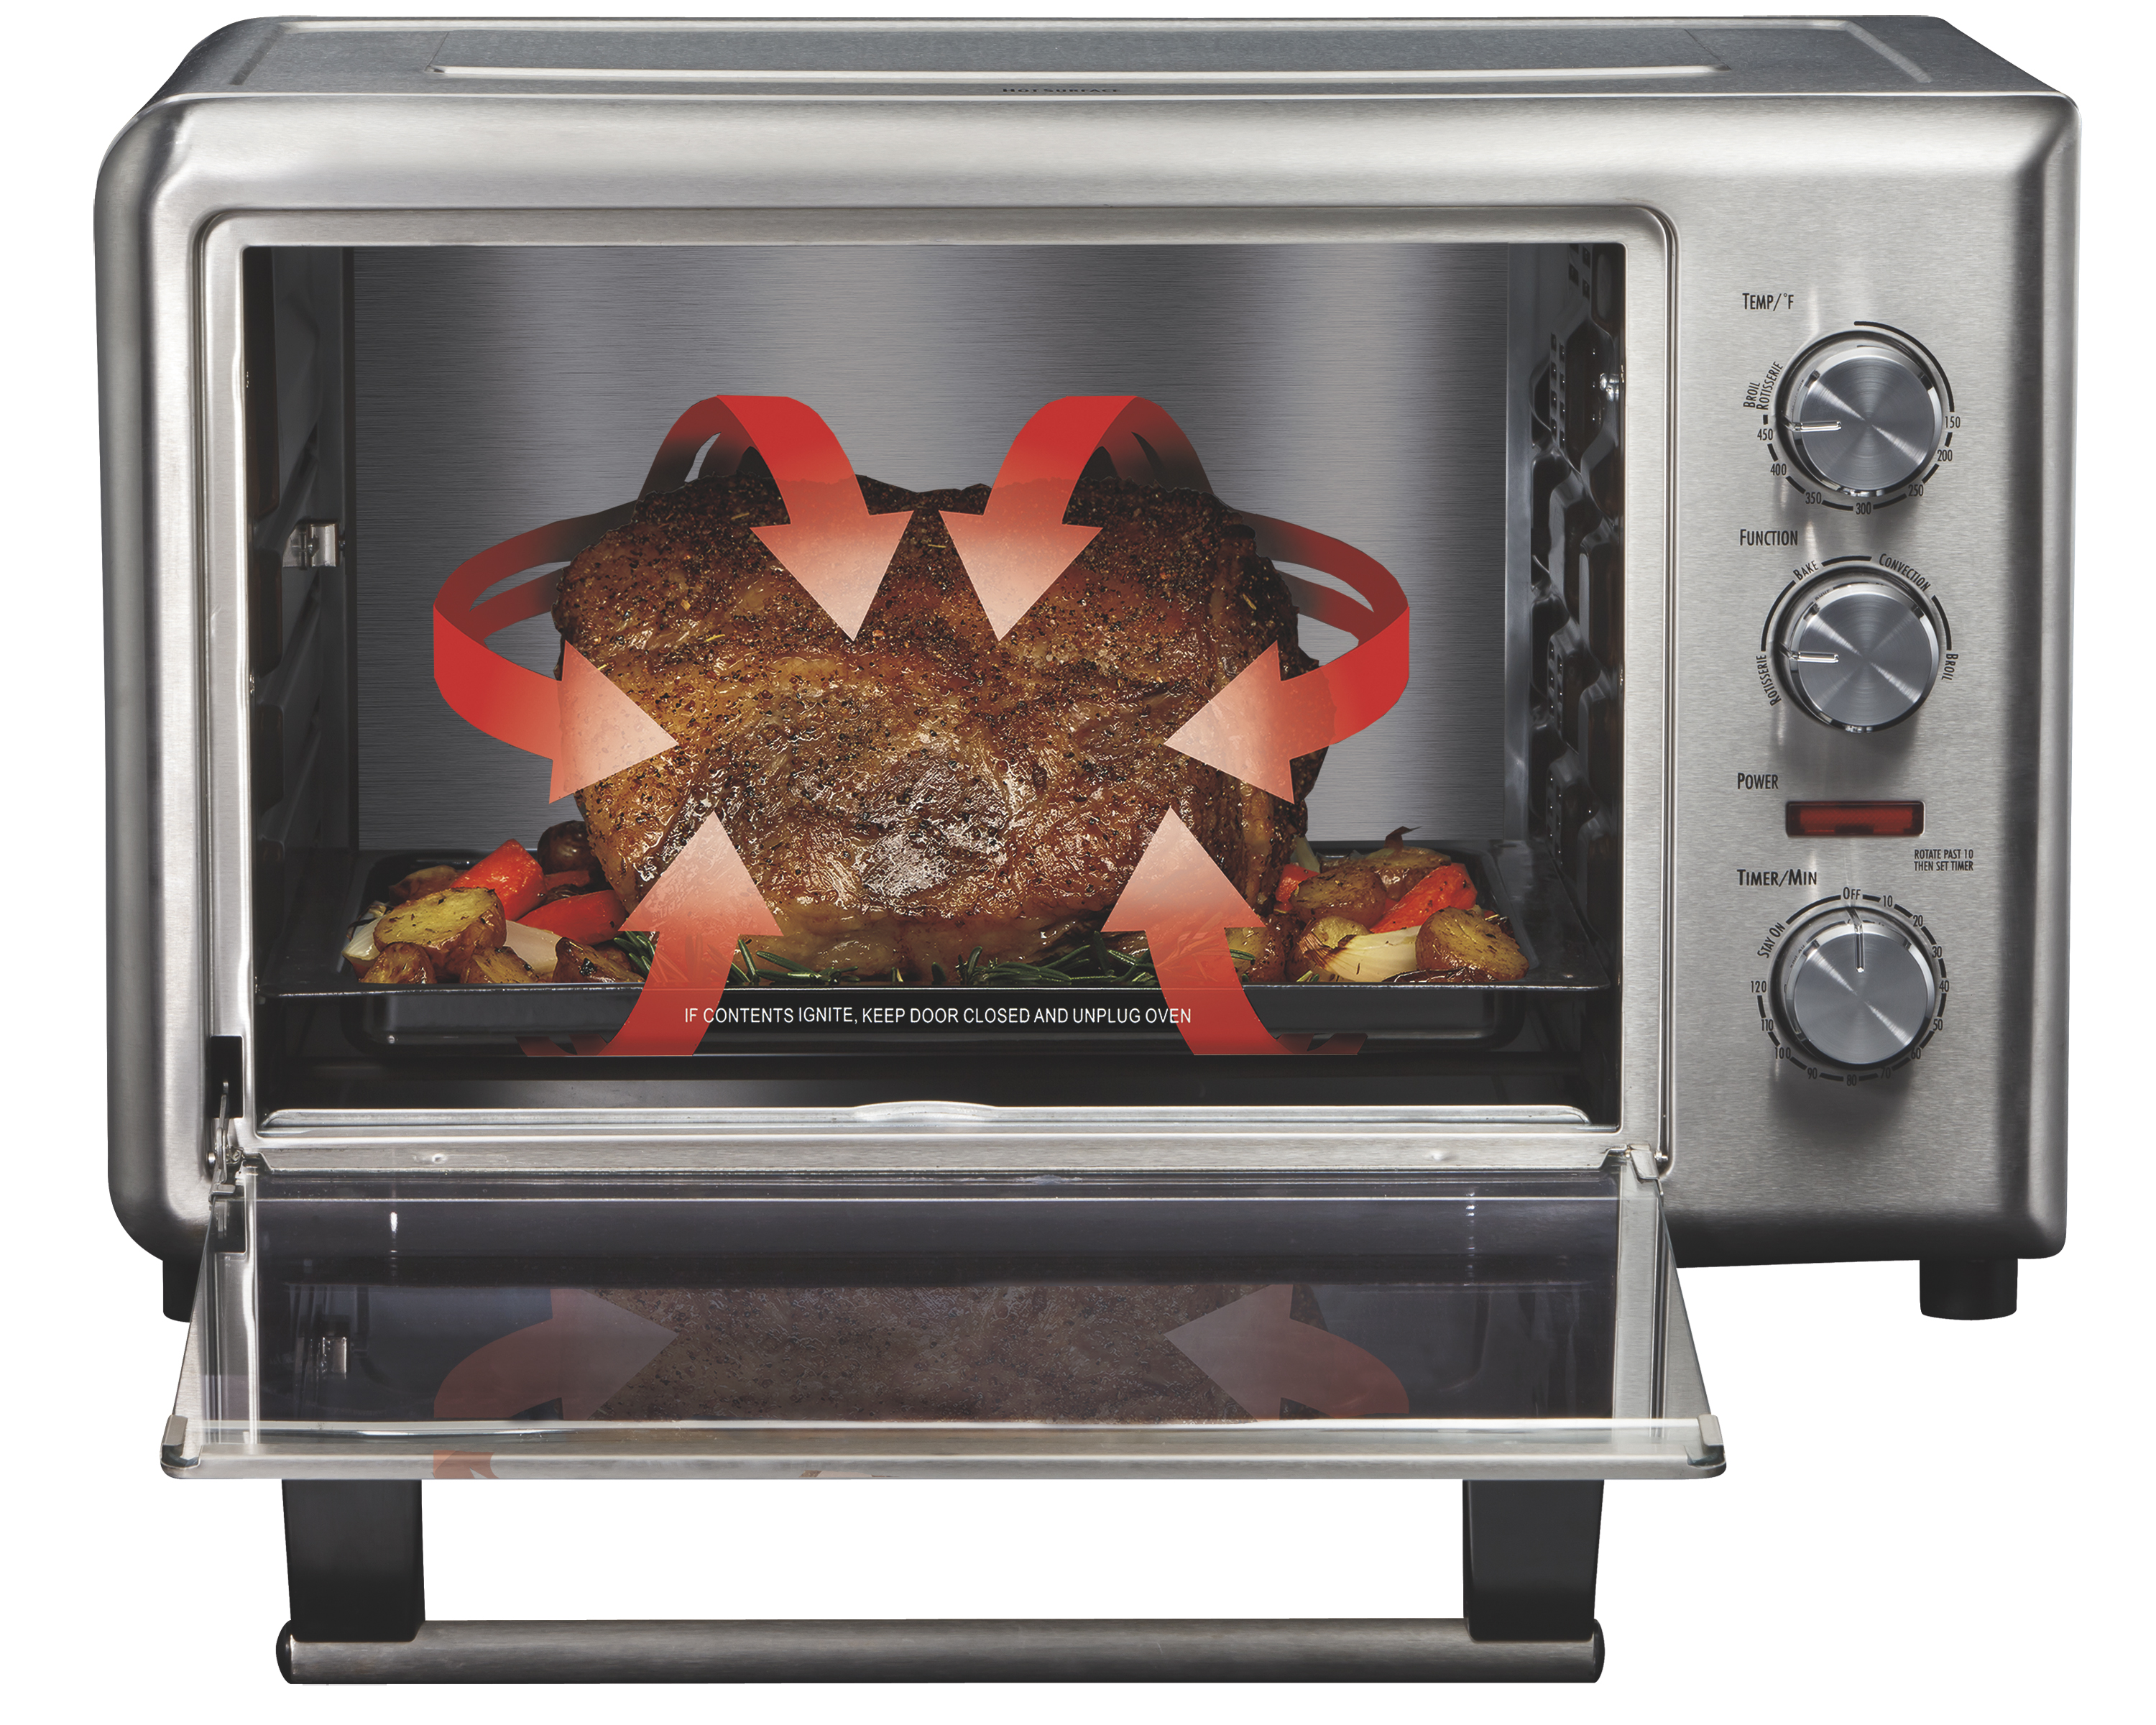 Hamilton Beach Countertop Oven with Convection and Rotisserie, Baking, Broil, Extra Large Capacity, Stainless Steel, 31103 - image 2 of 6